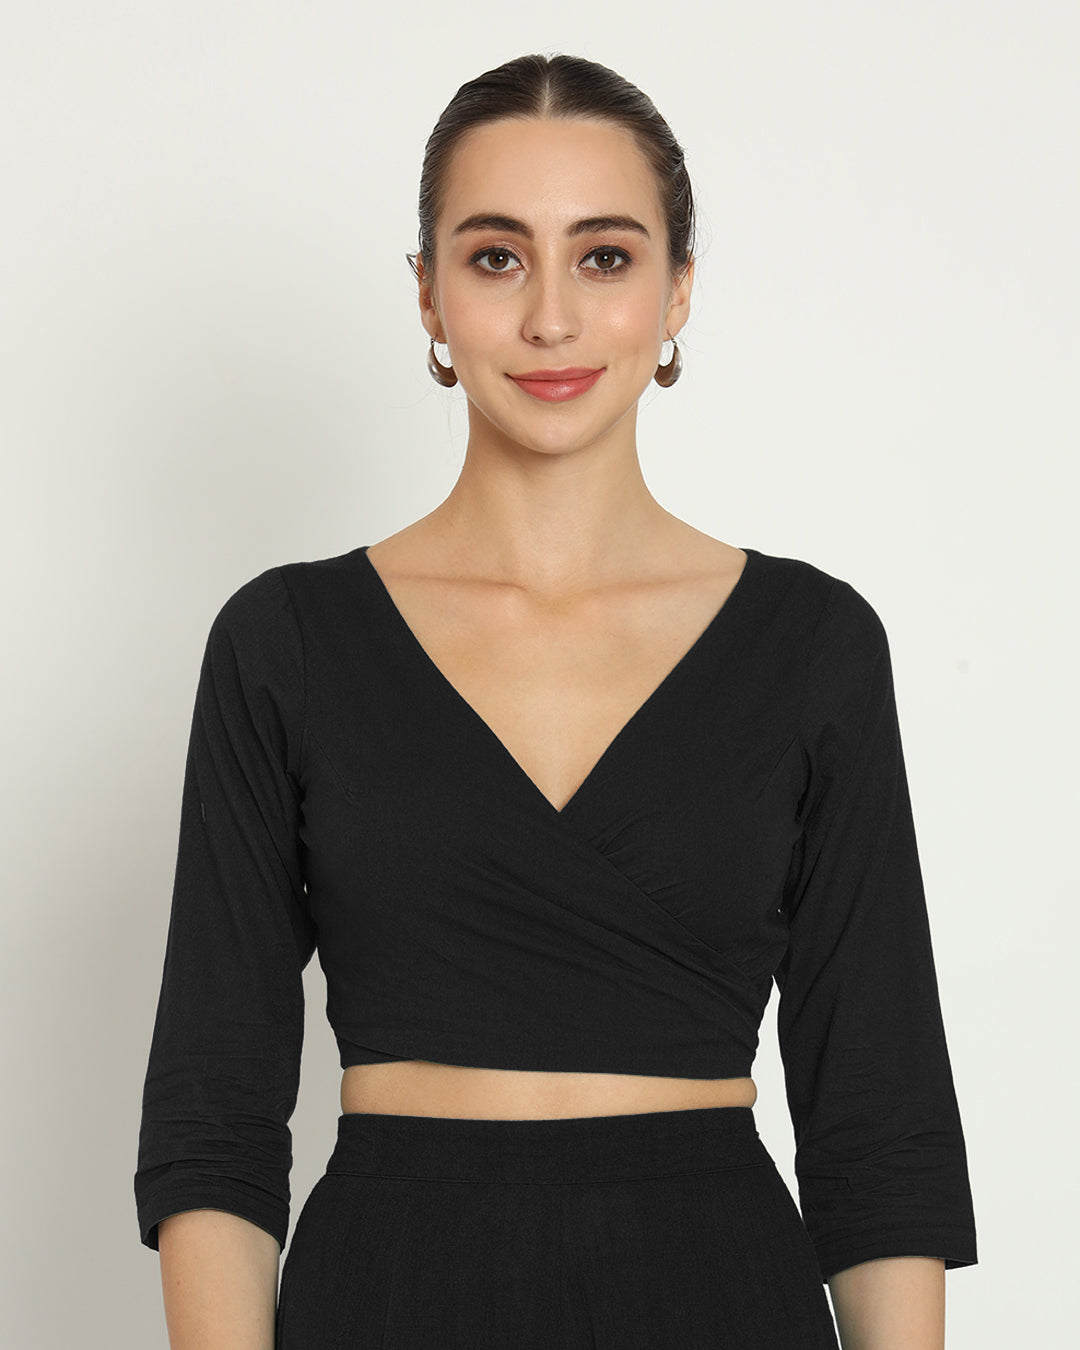 Classic Black Knotty By Nature Blouse